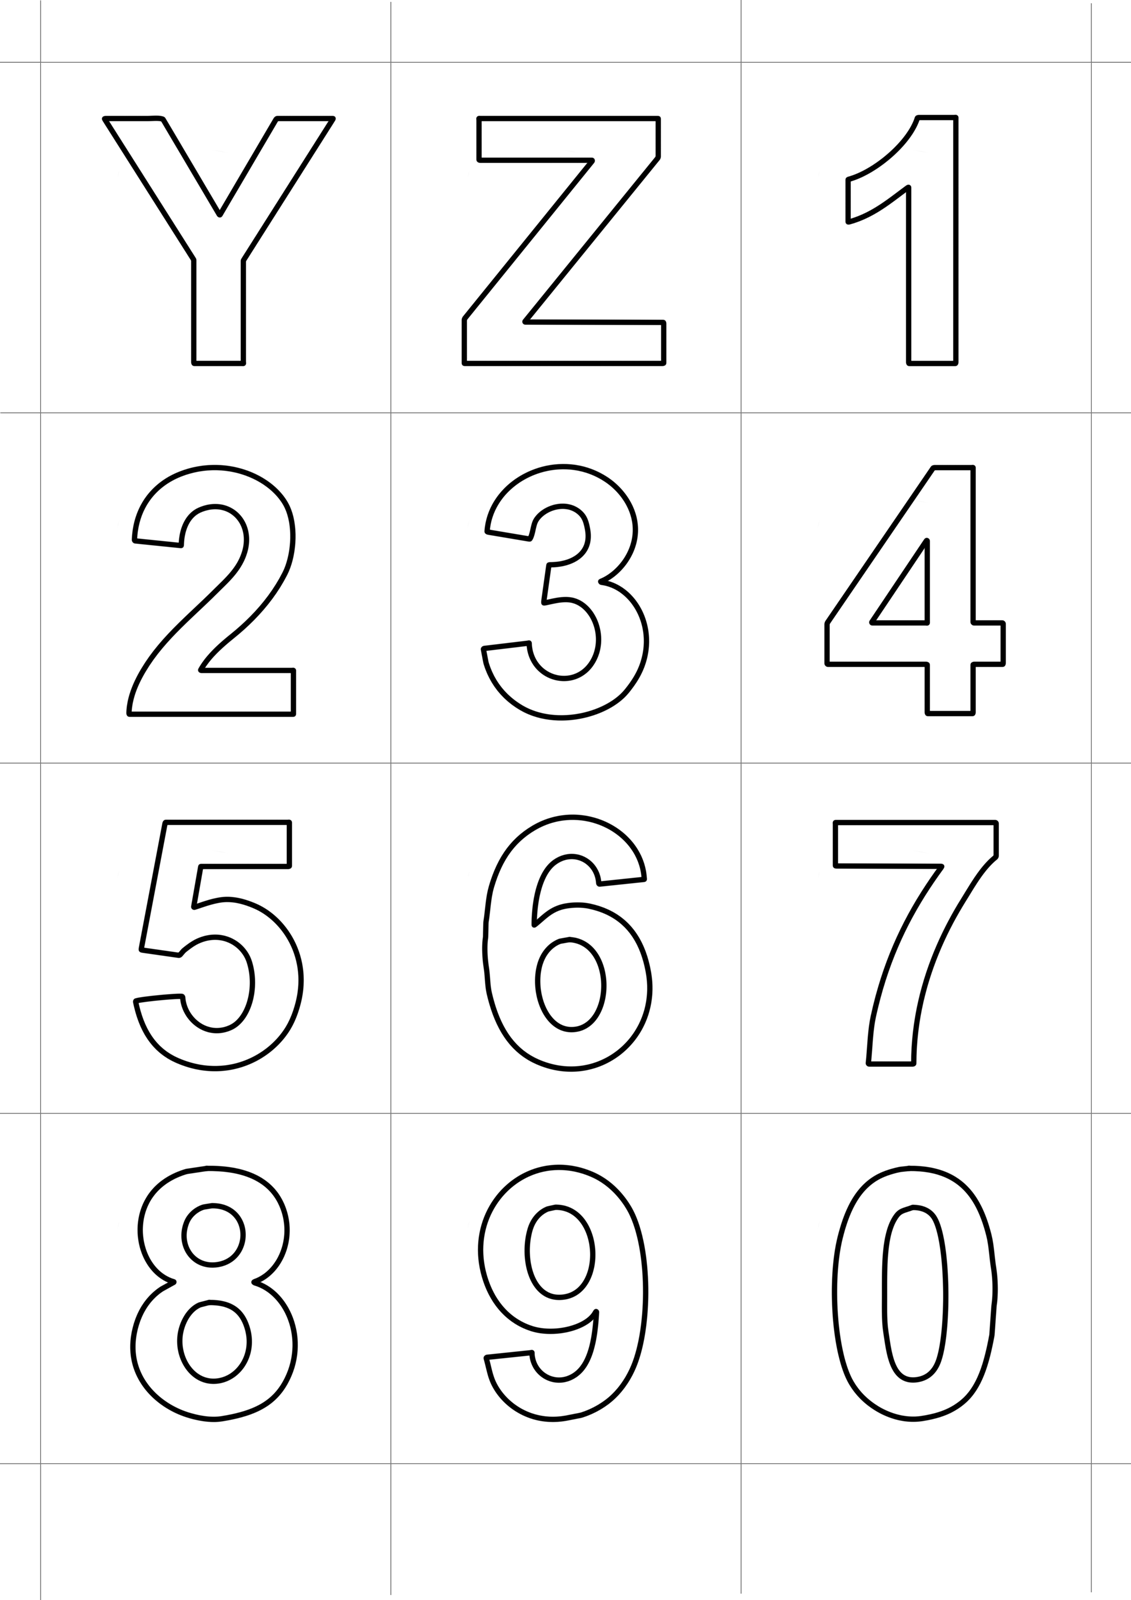 Letters and numbers - Letters in block letters Y - Z and numbers from 0 to 9